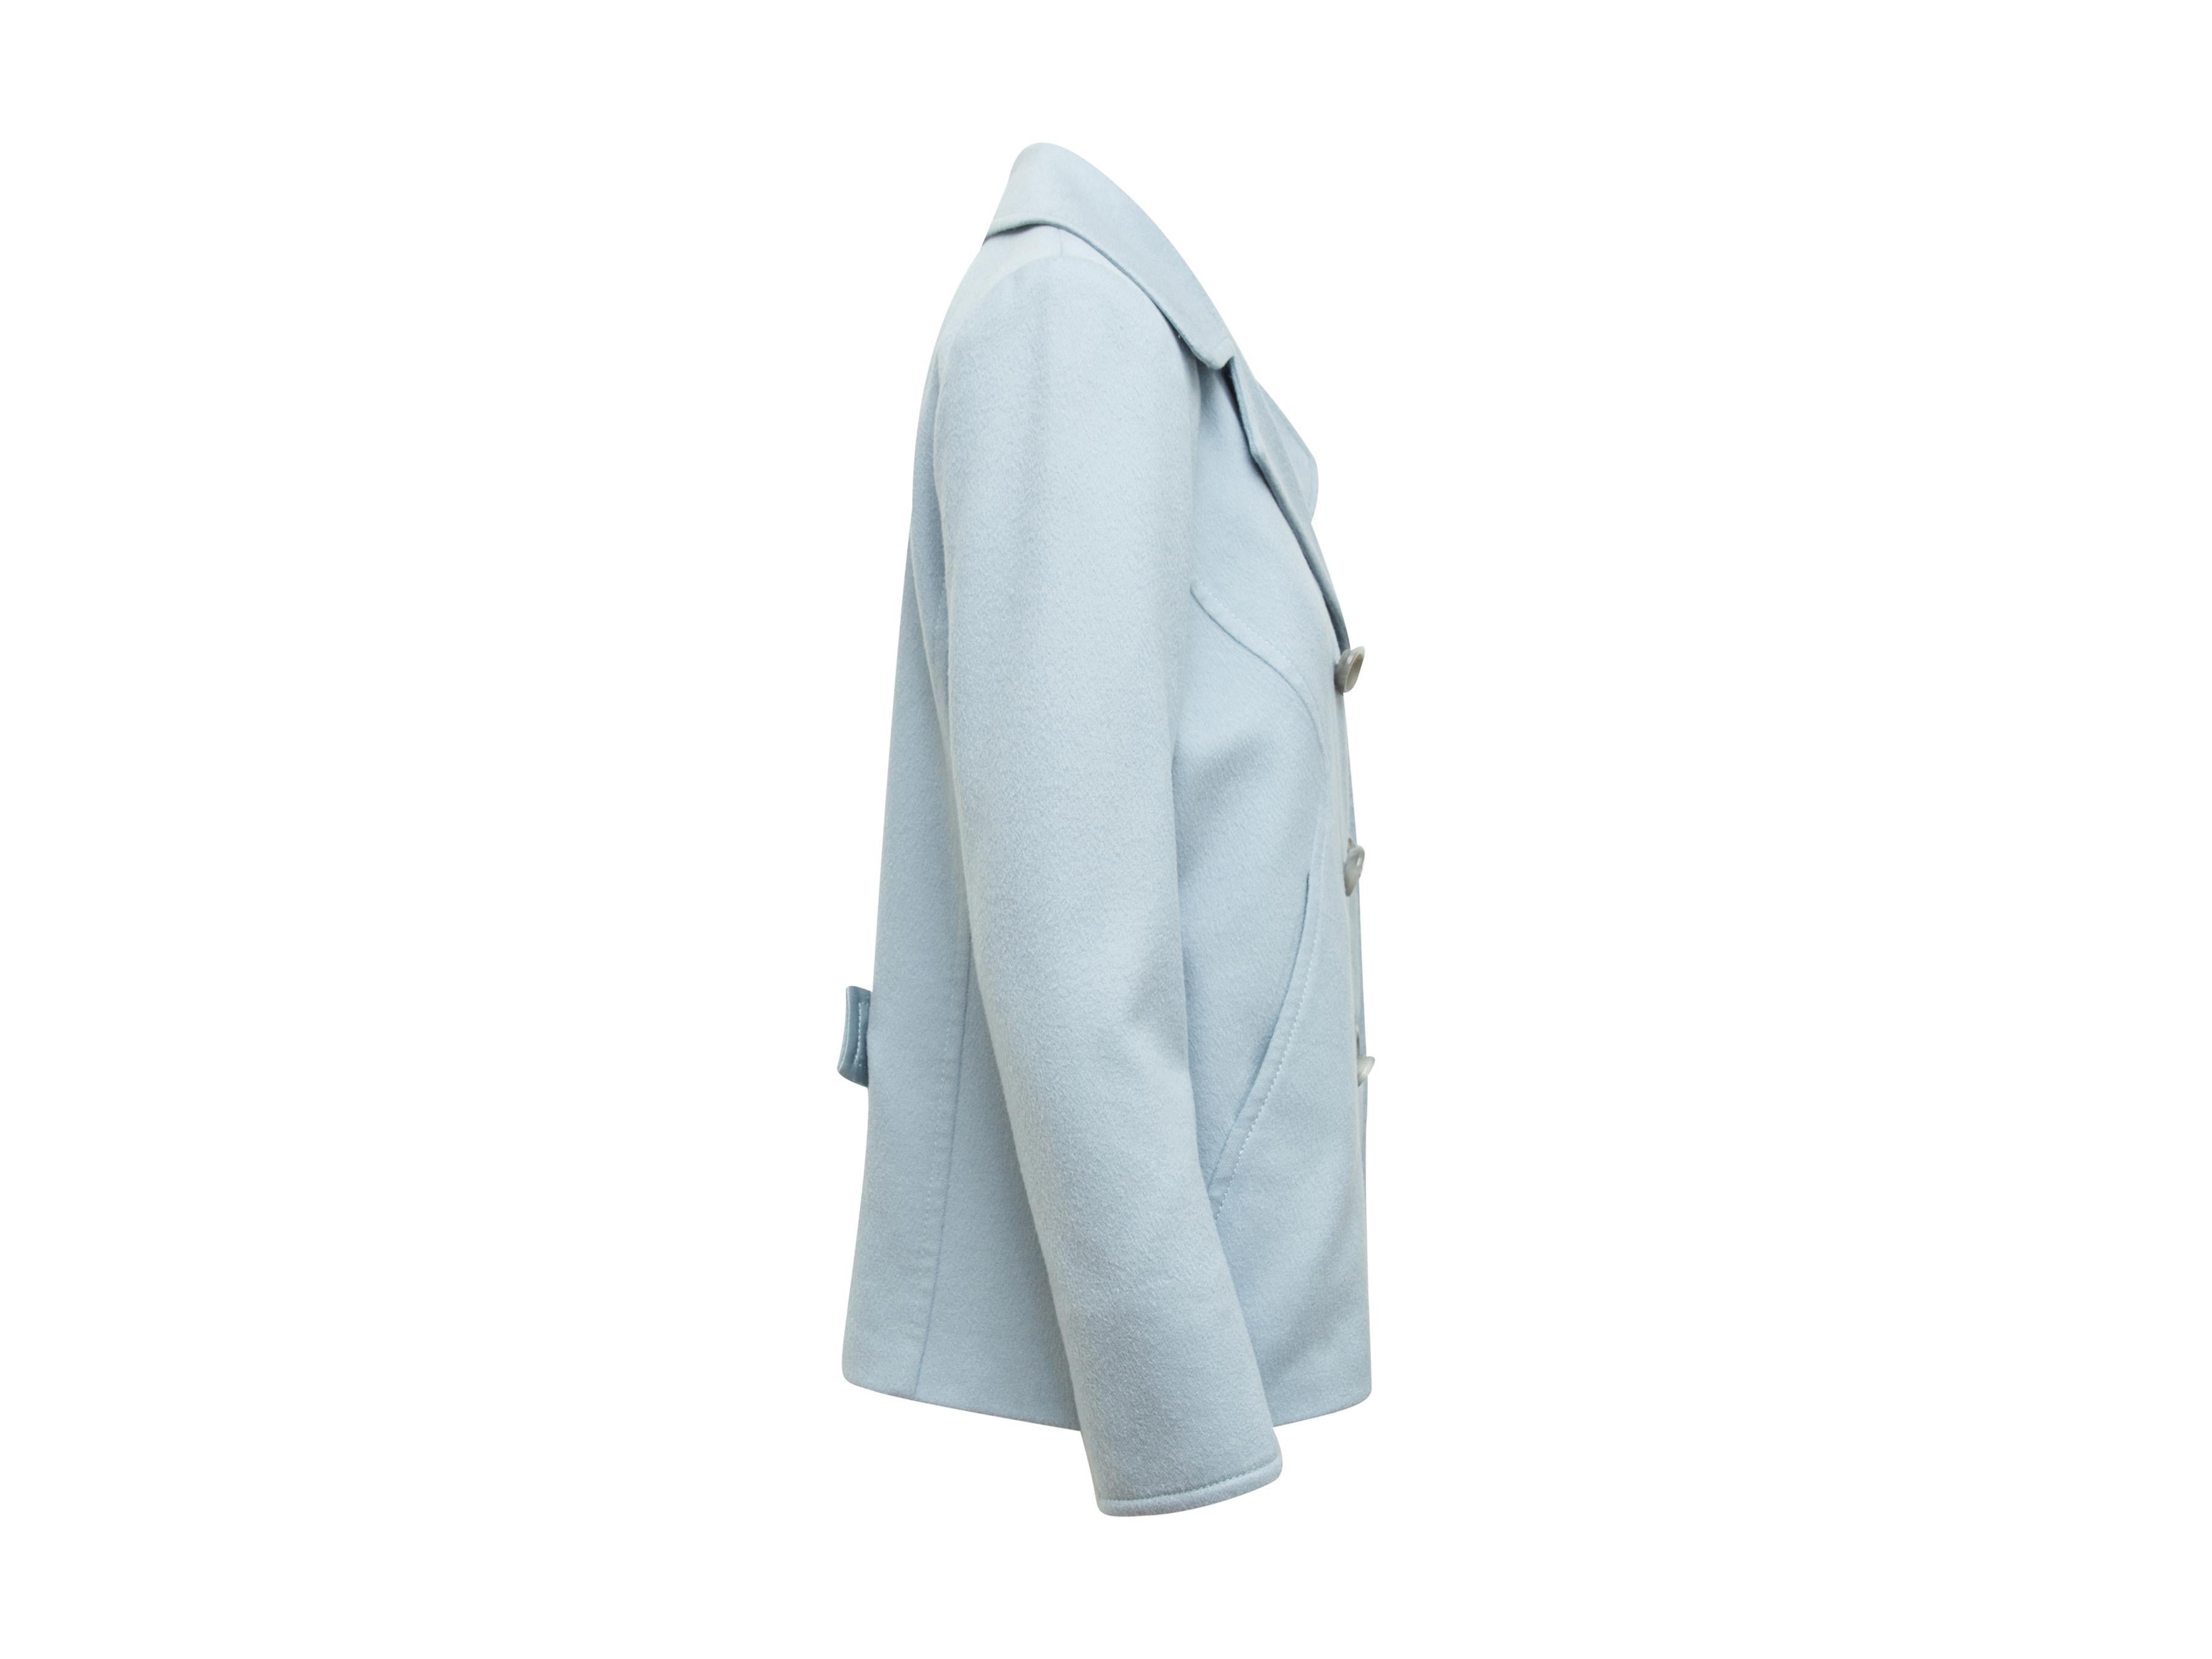 Product details:  Light blue wool/silk-blend peacoat by Carolina Herrera.  Notched lapel.  Long sleeves.  Double-breasted button-front closure.  36